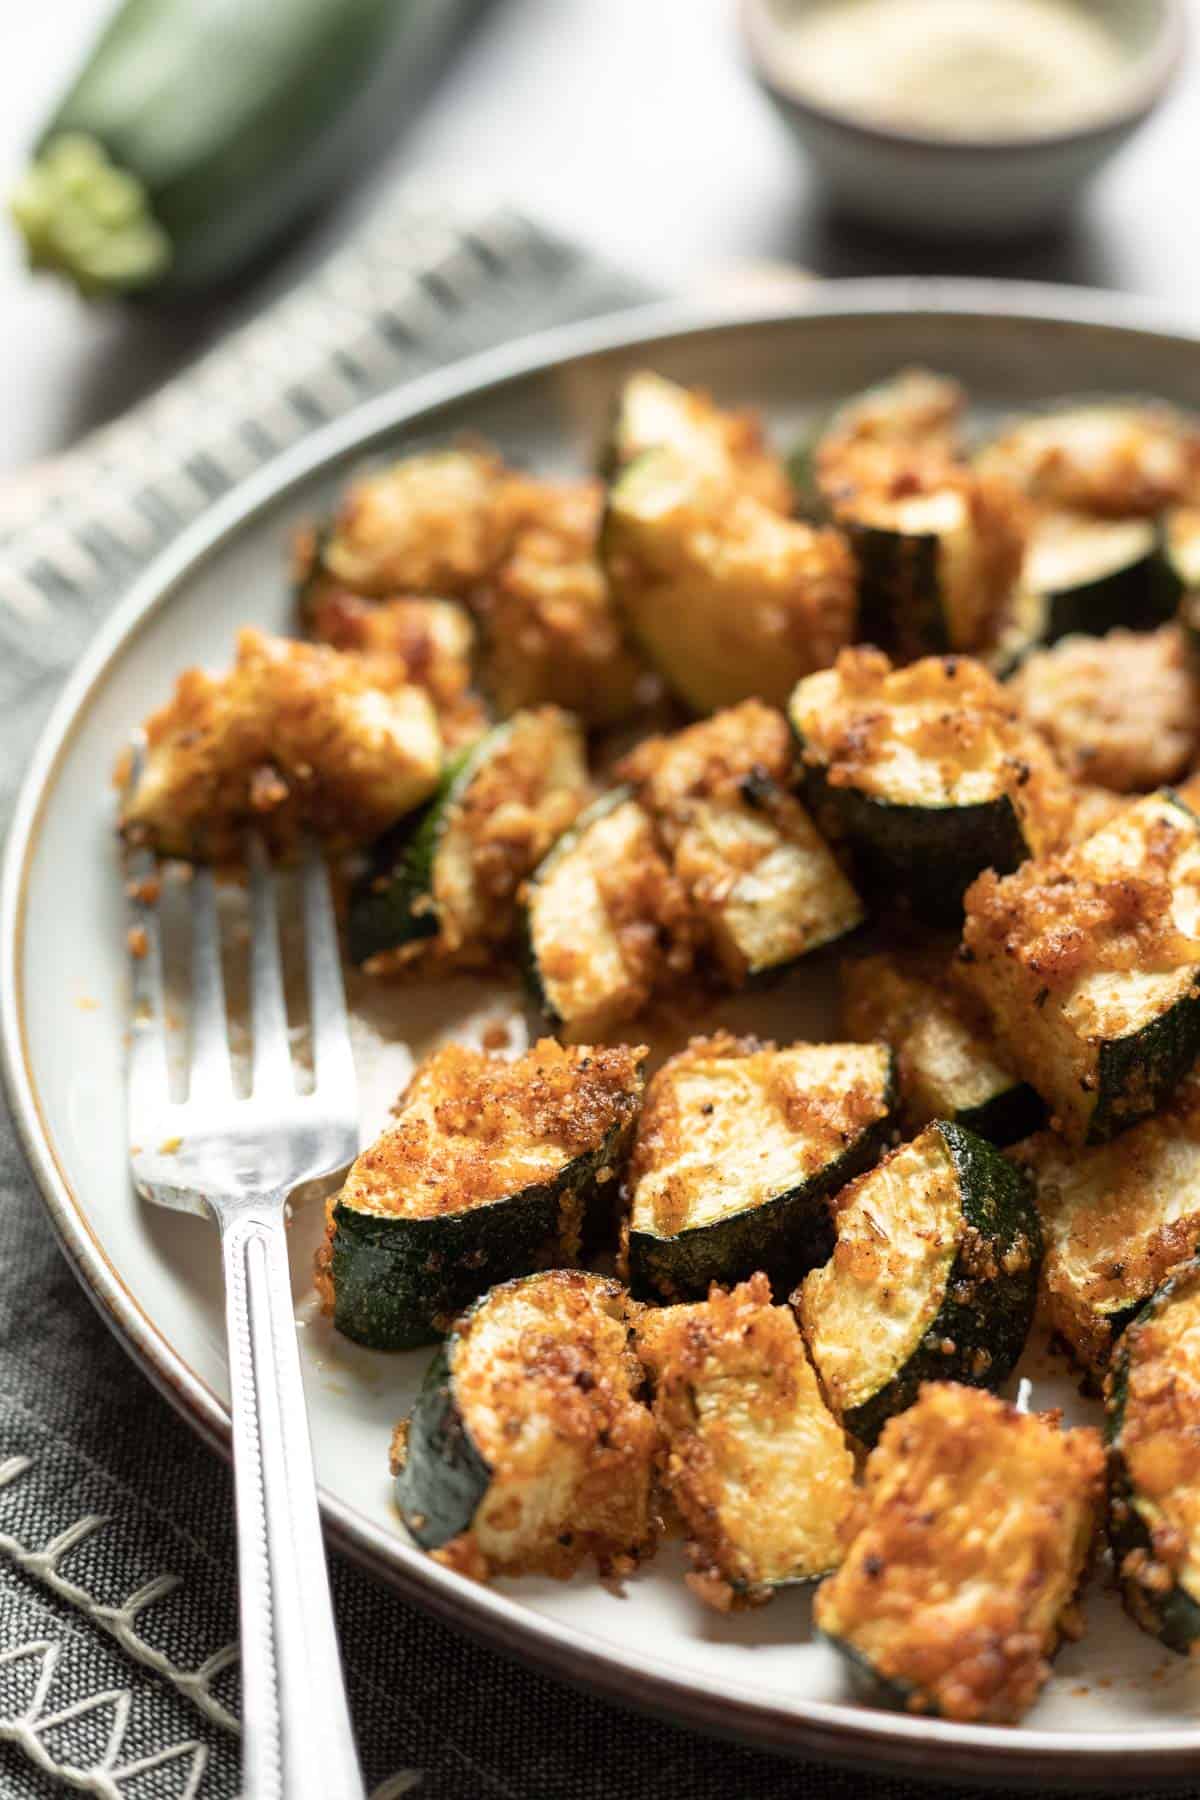 panko breaded bite-size pieces of air fryer zucchini on a plate.